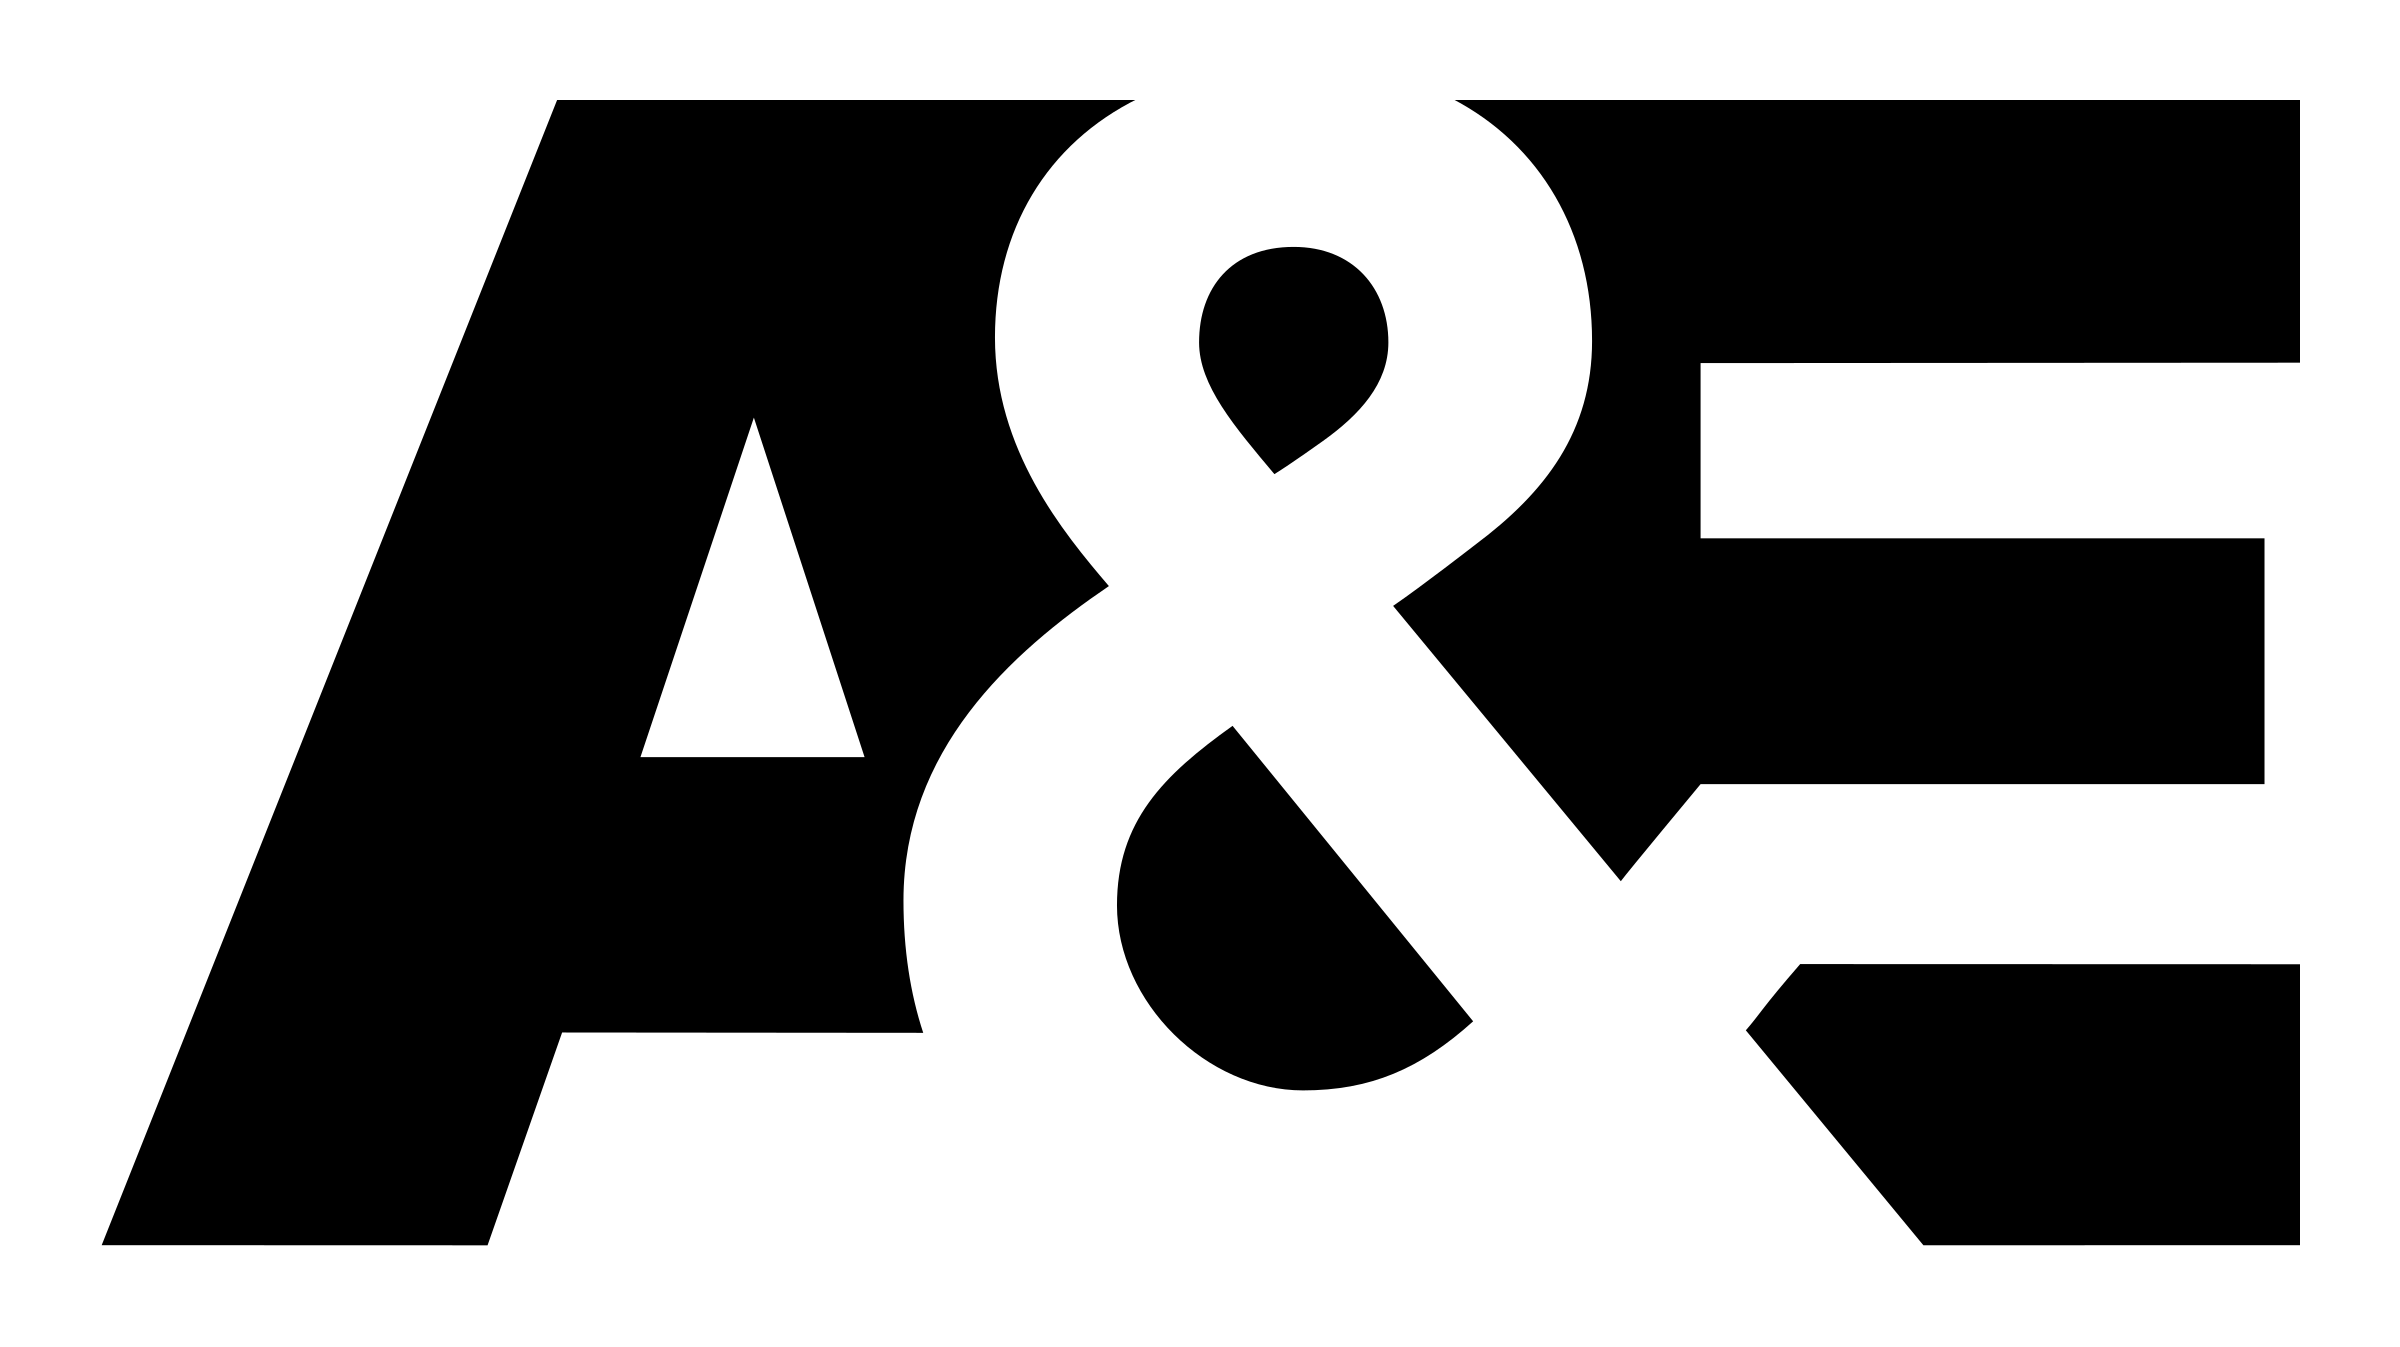 ae-logo-black-and-white.png